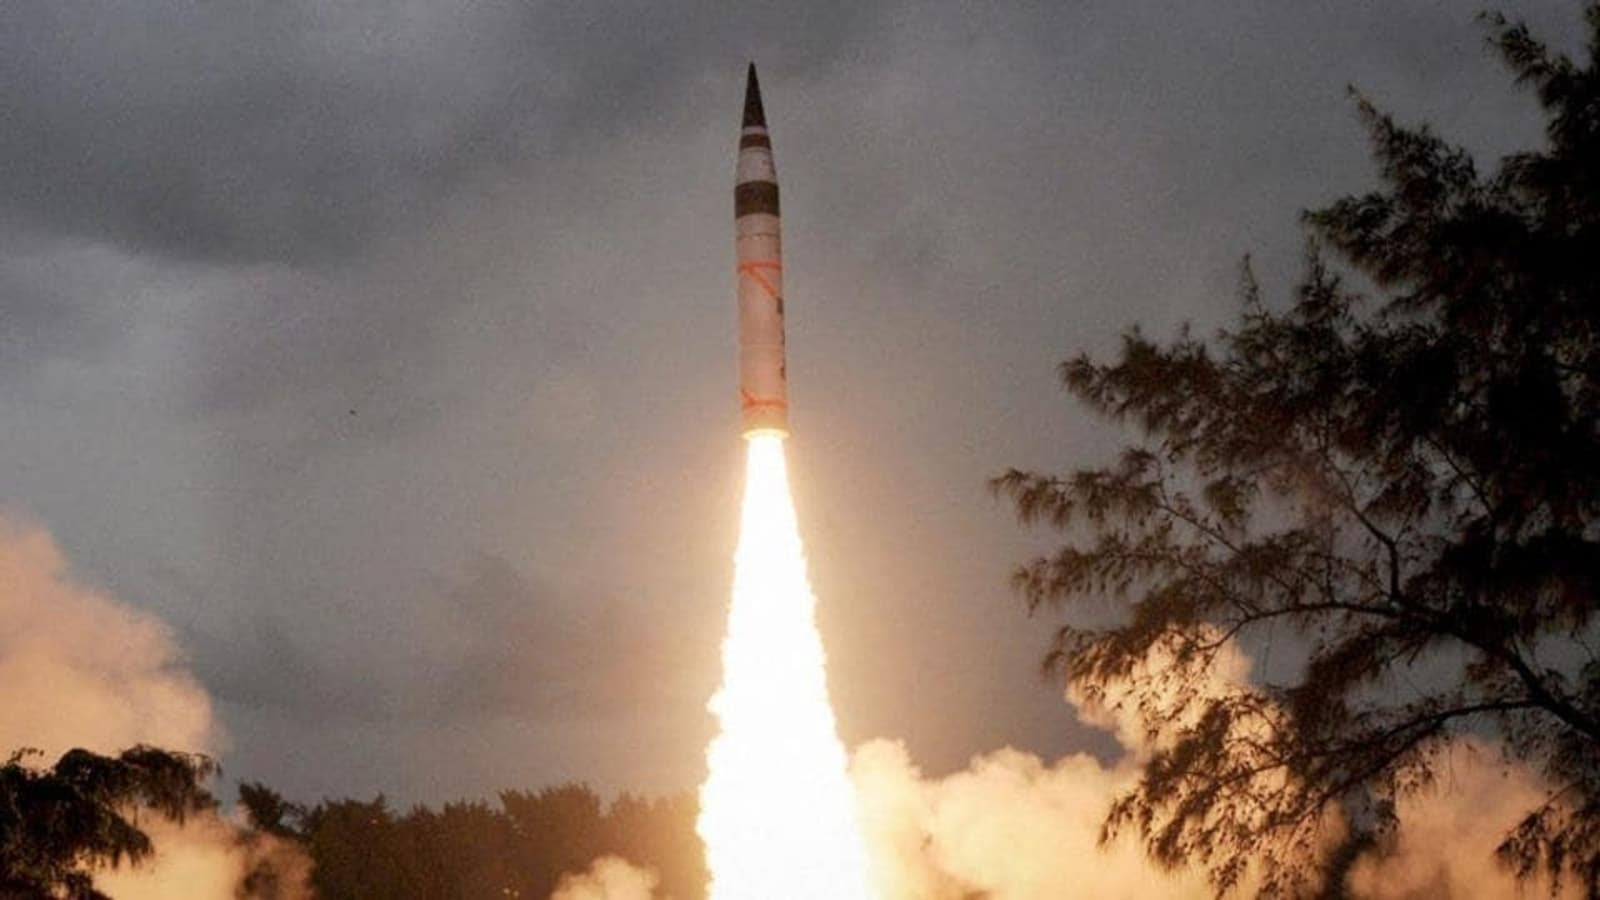 India test-fires Agni-V missile amid border tensions with China.